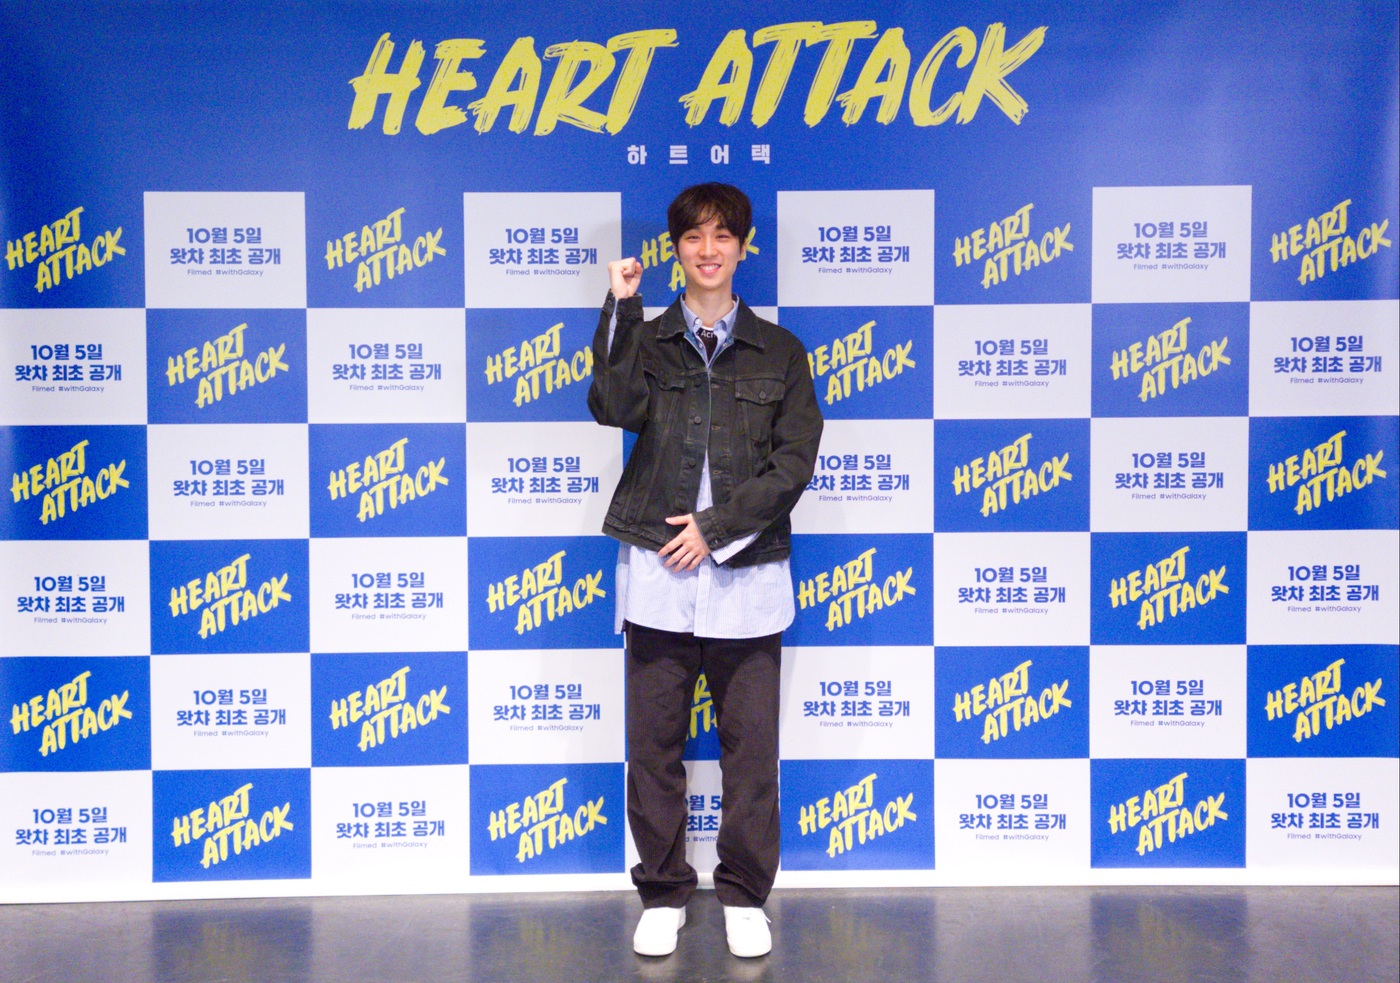 On the 5th, 11 am short film Heart A Tag production report was held online, and Lee Chung-hyeon and Kim Sang-il were present.Lee Chung-hyeon said, I wanted to see the man as much as possible as possible, so I chose a blonde Foreign, Ukrainian-language actor. Then I wanted to feel like a mystery. I actually have no experience in Acting, but I did not have a concept of video shooting even when I was rehearsing, so I did not have a concept of action or cut, so I first worked on it. Fortunately, it was really natural in the field, and it was a new work in that regard.Meanwhile, Heart A Tag is a time-slip fantasy romance about a woman who turns 100 times to save her loved one, starring Lee Sung-kyung.Director Lee Chung-hyeon of the short film Body Value and the feature debut Call caught megaphone, and the main movie was shot only on smartphones.Open at Whatcha on the 5th.